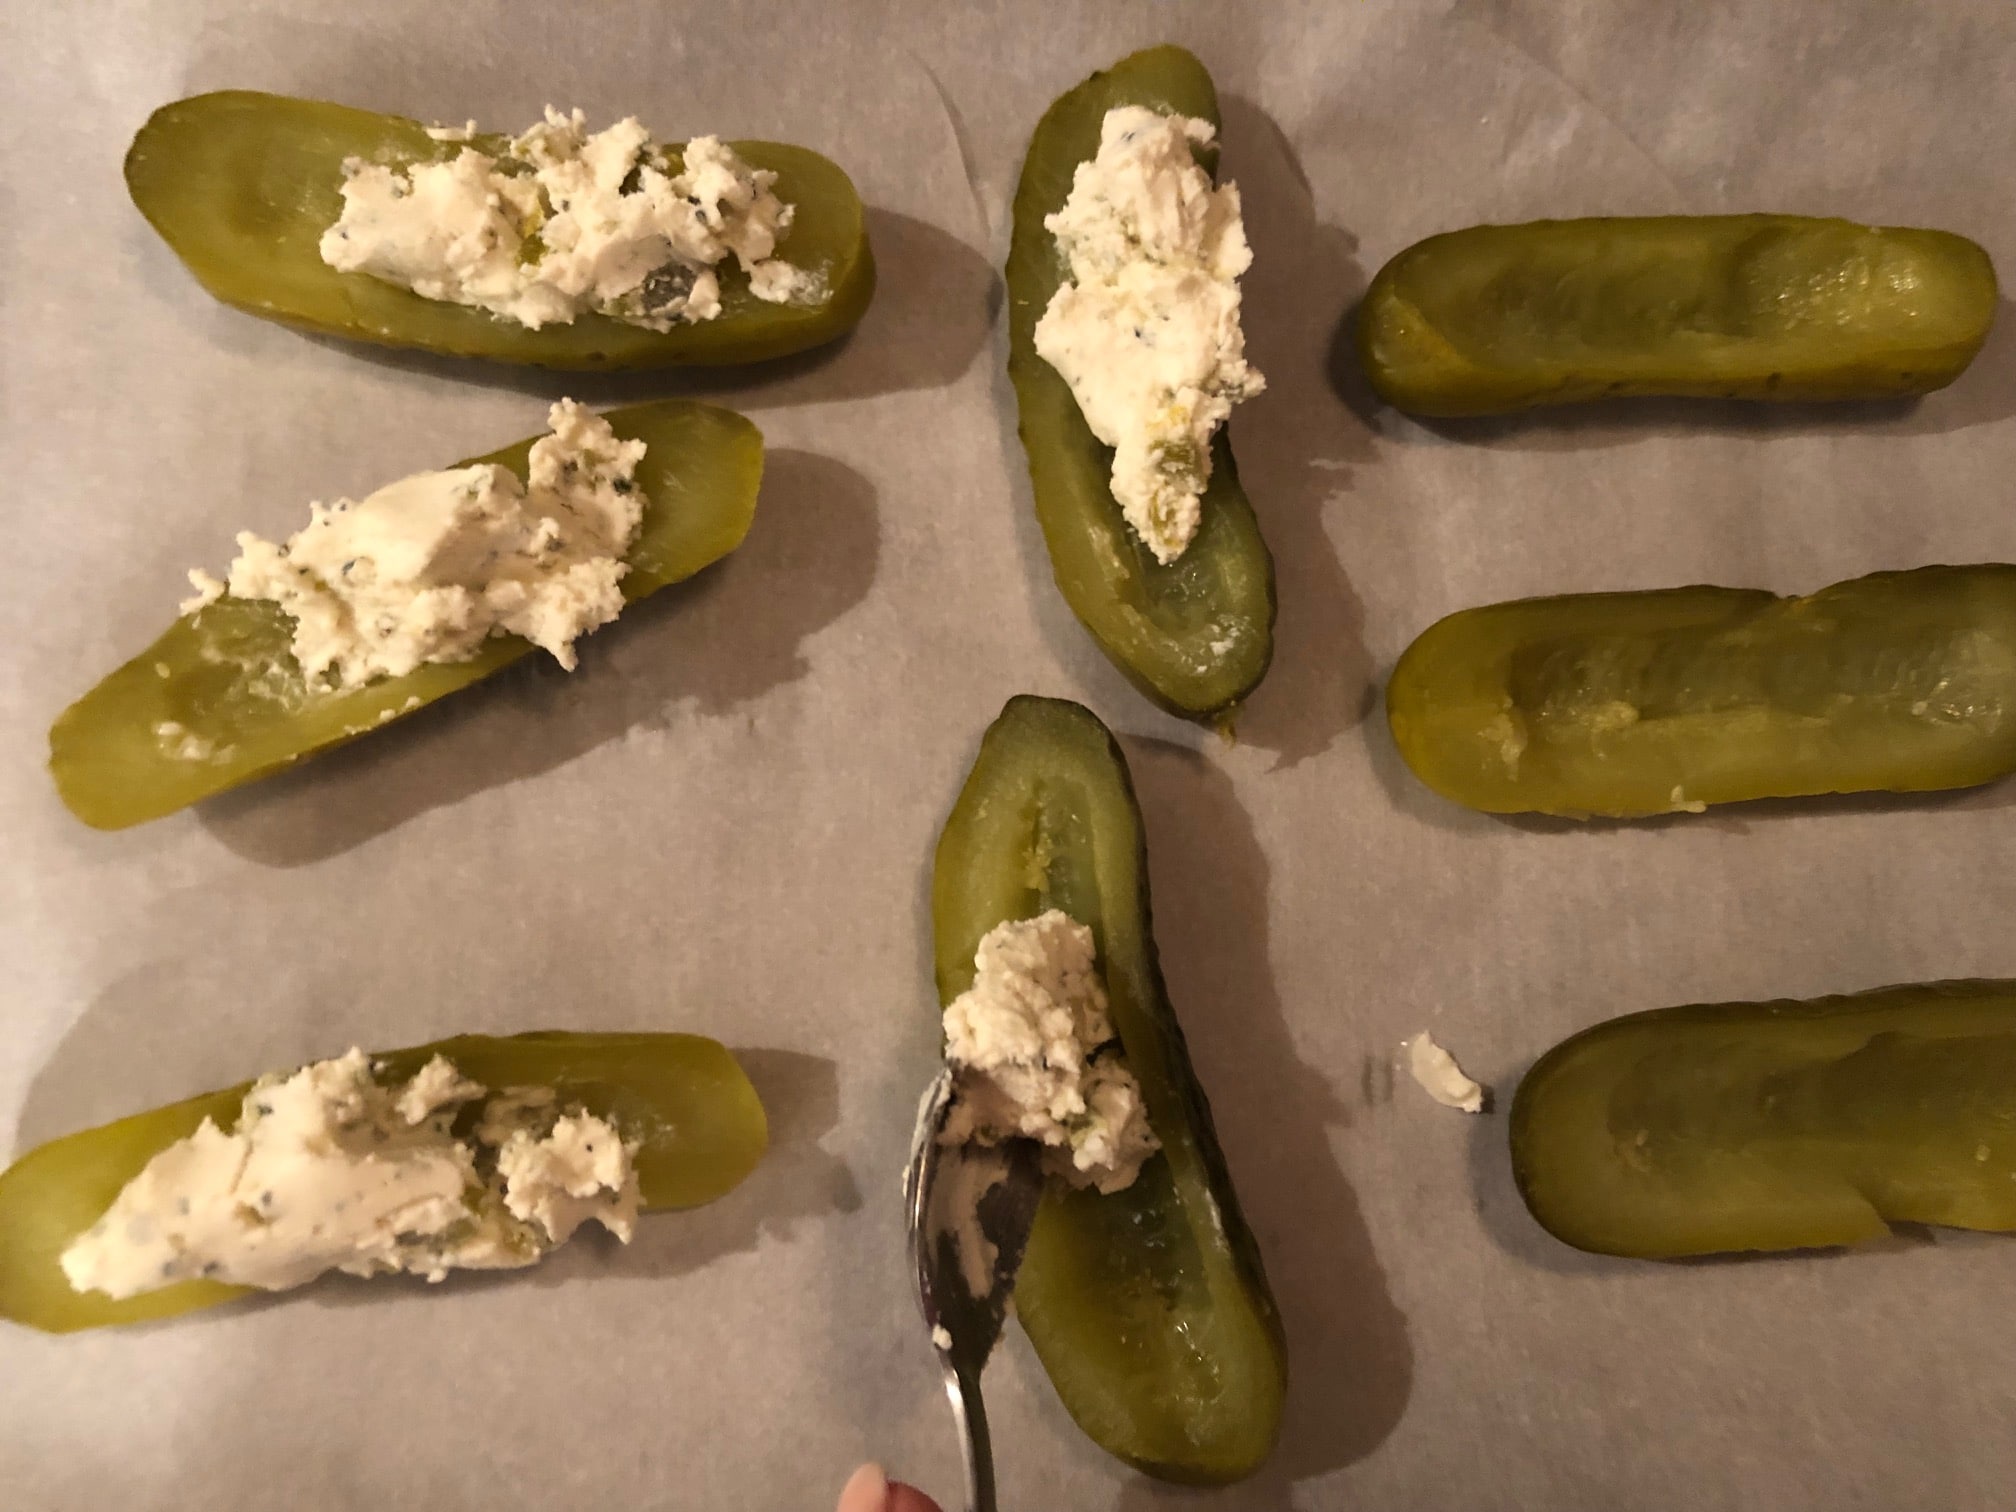 Boursin cheese mixture spooned into pickles